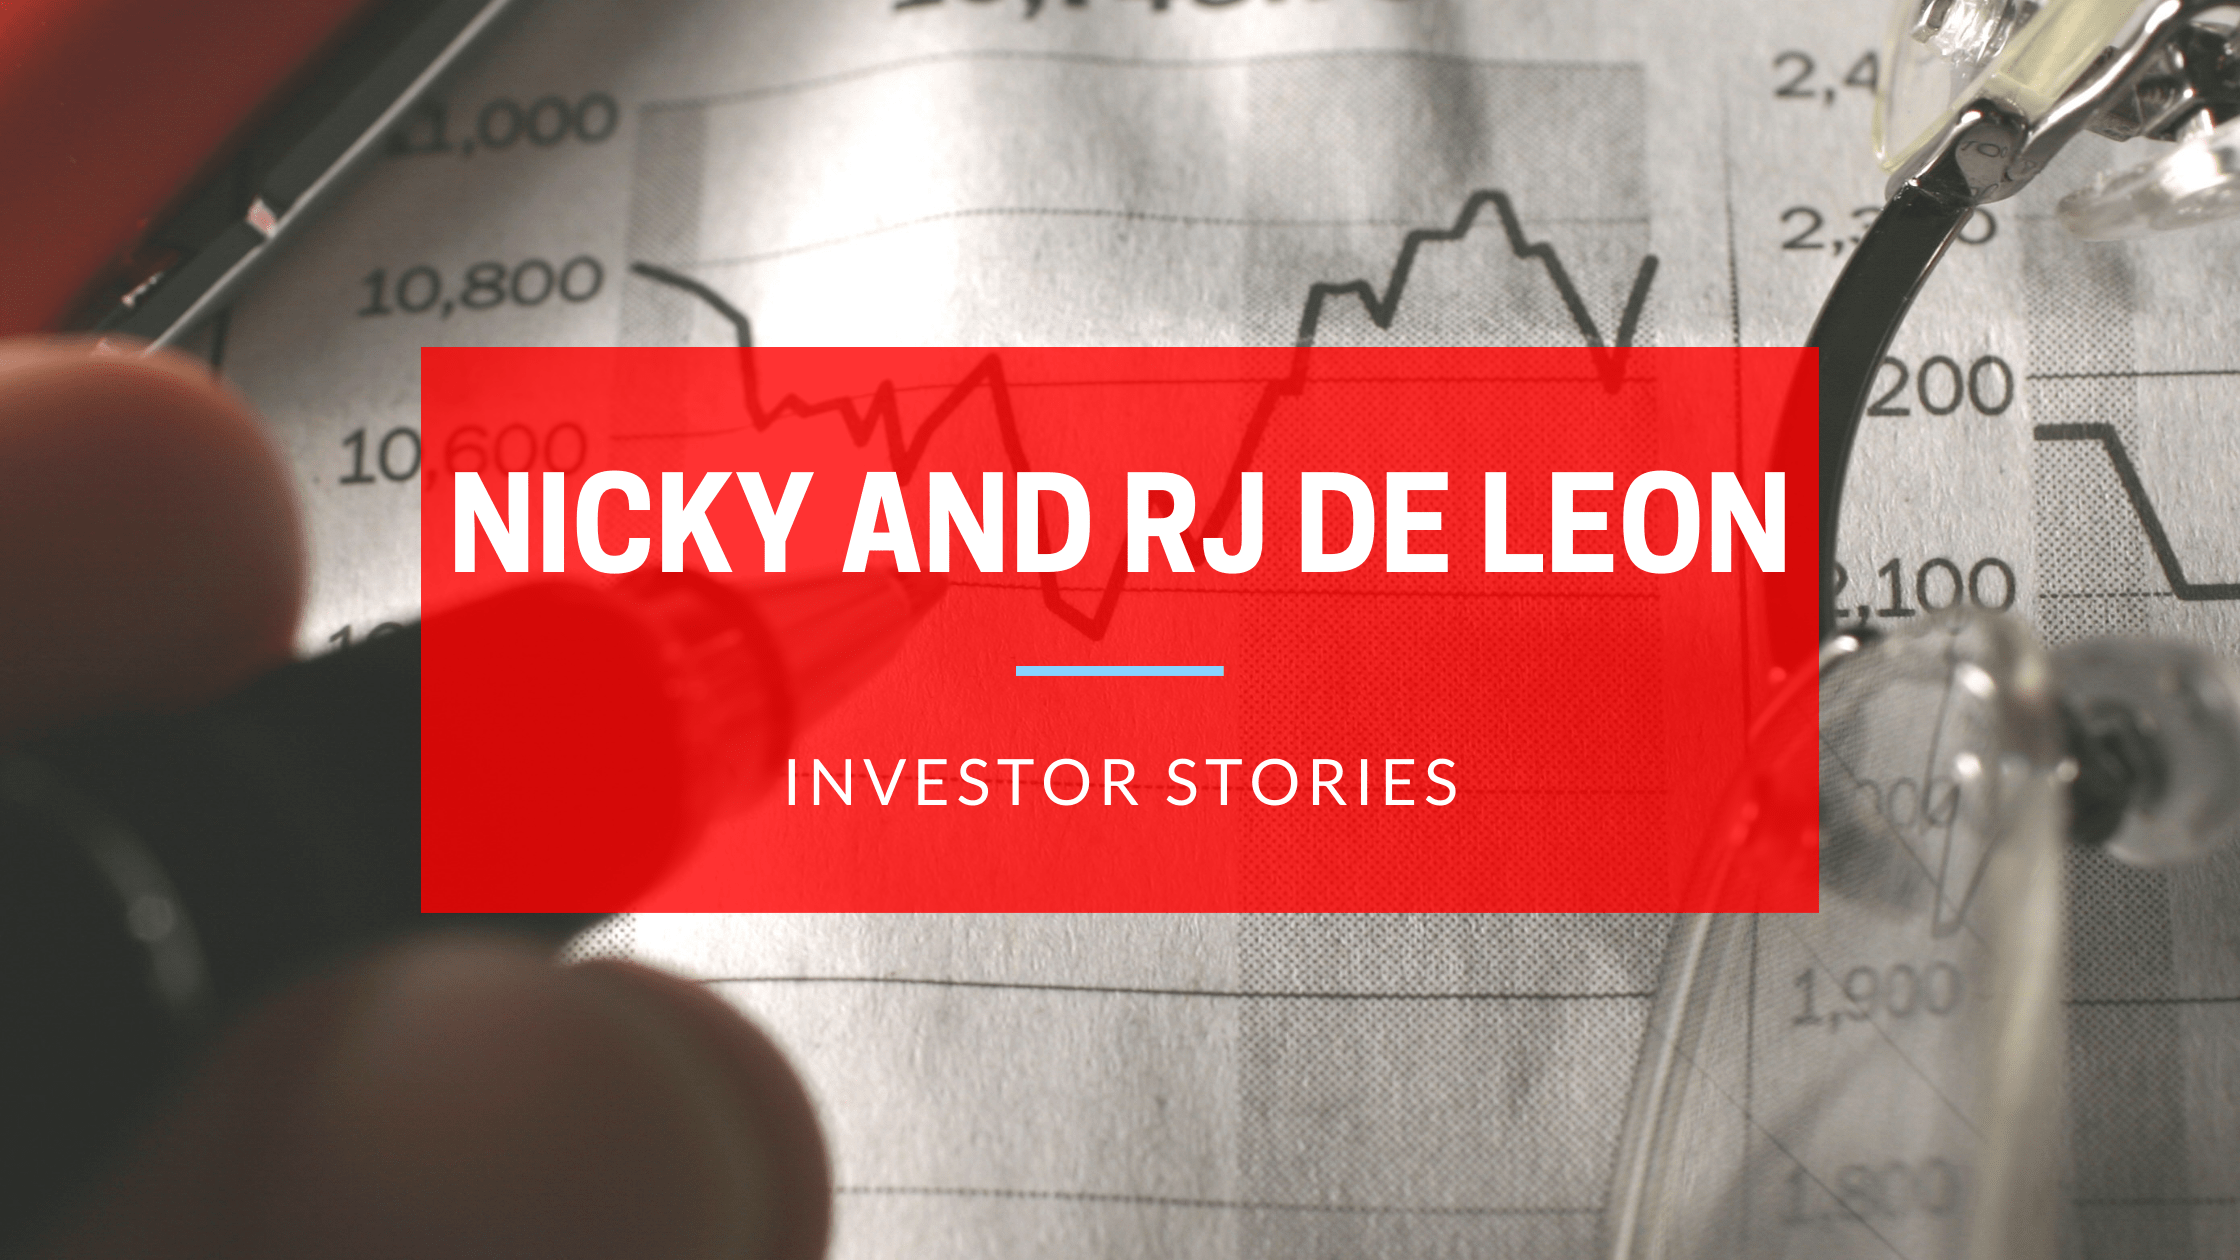 Investor Story featuring Nicky and RJ De Leon